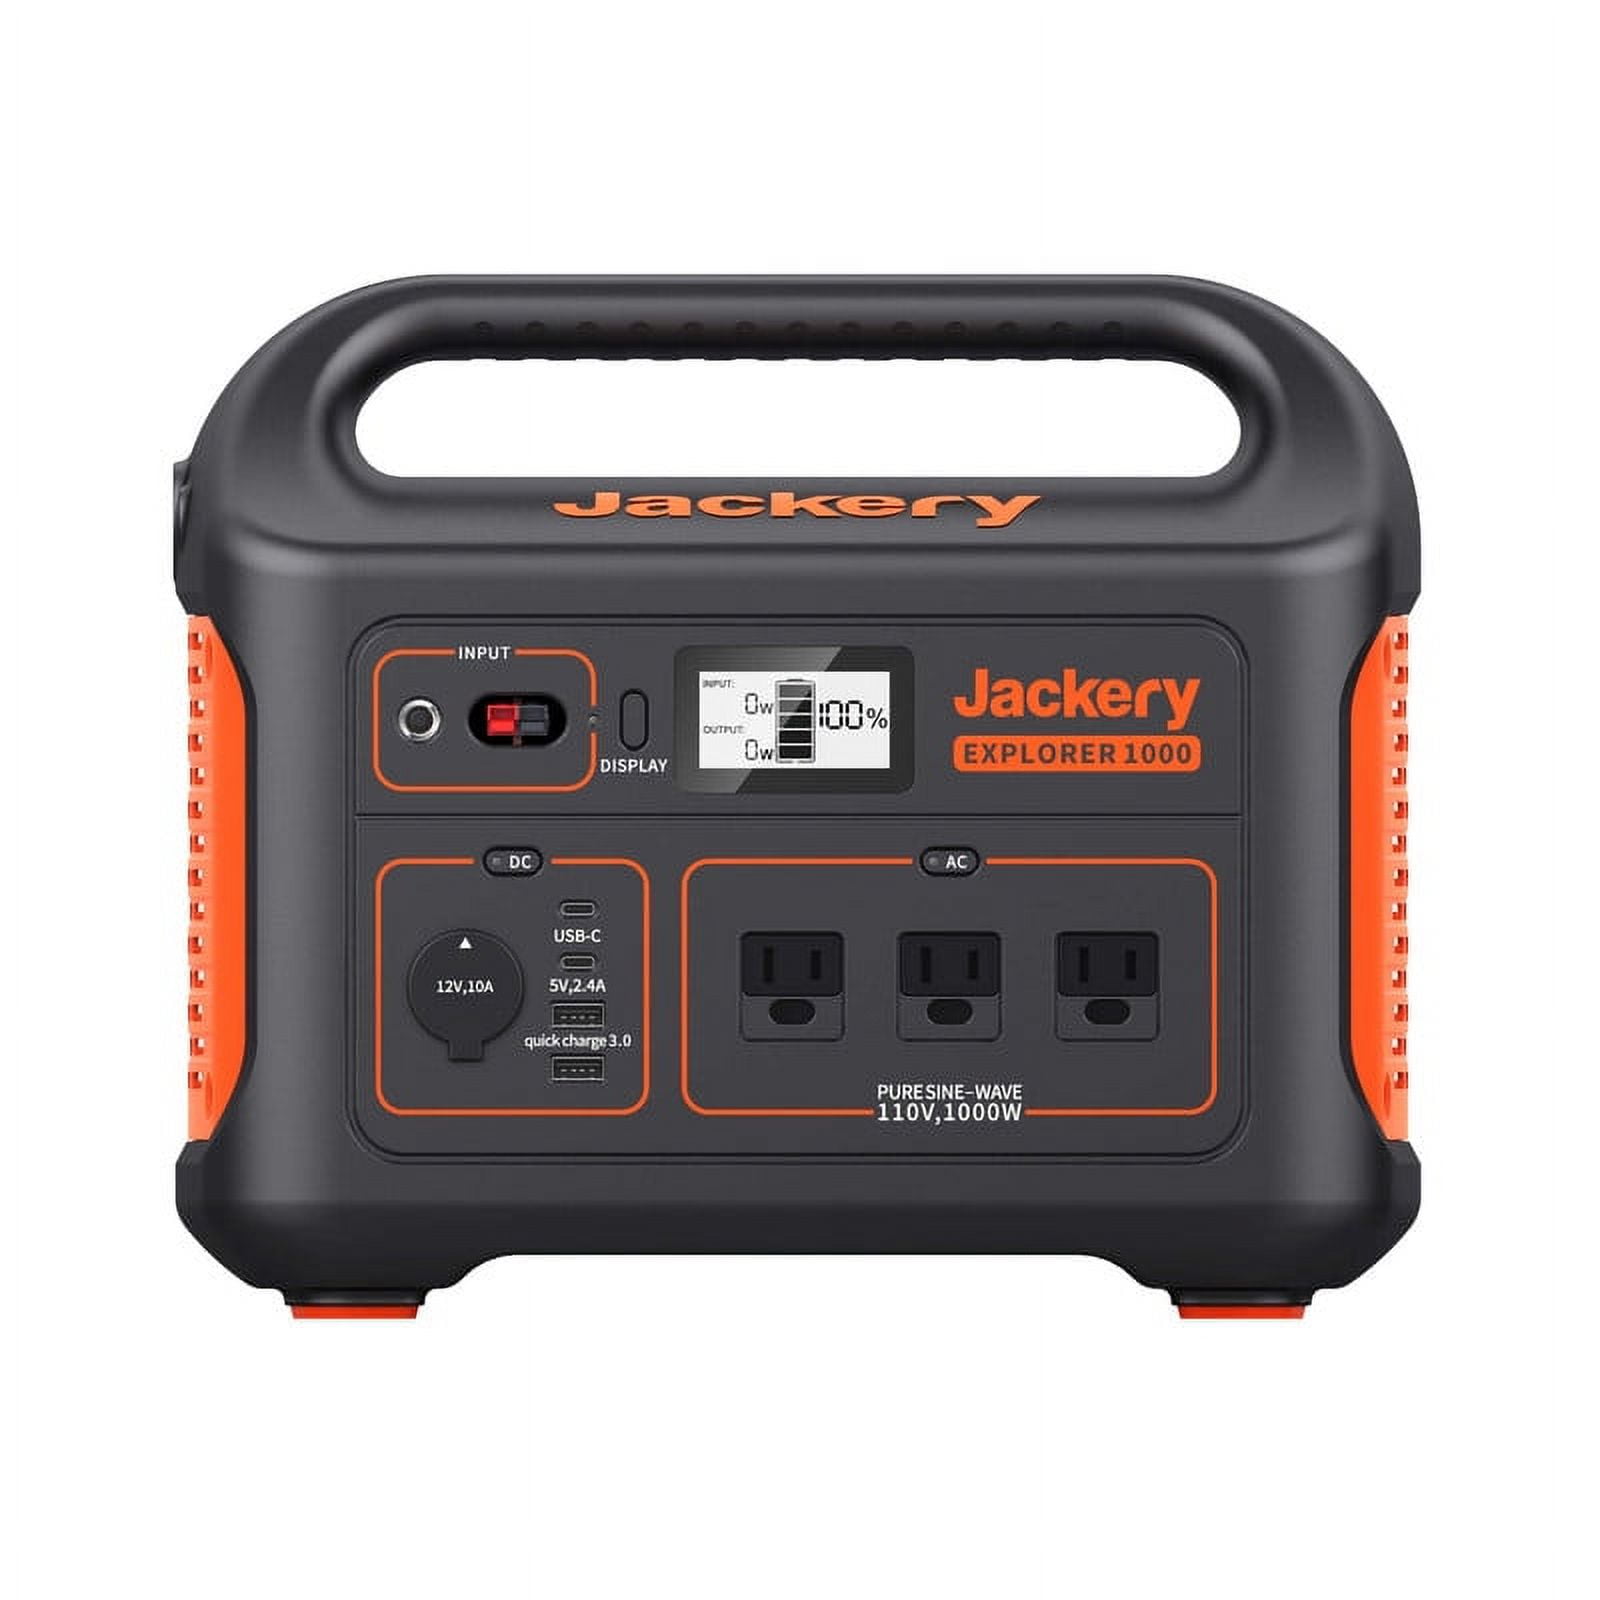 Jackery Explorer 1000 - Portable 1000W Solar Power Station with 2 Panels  for Sale in Scottsdale, AZ - OfferUp